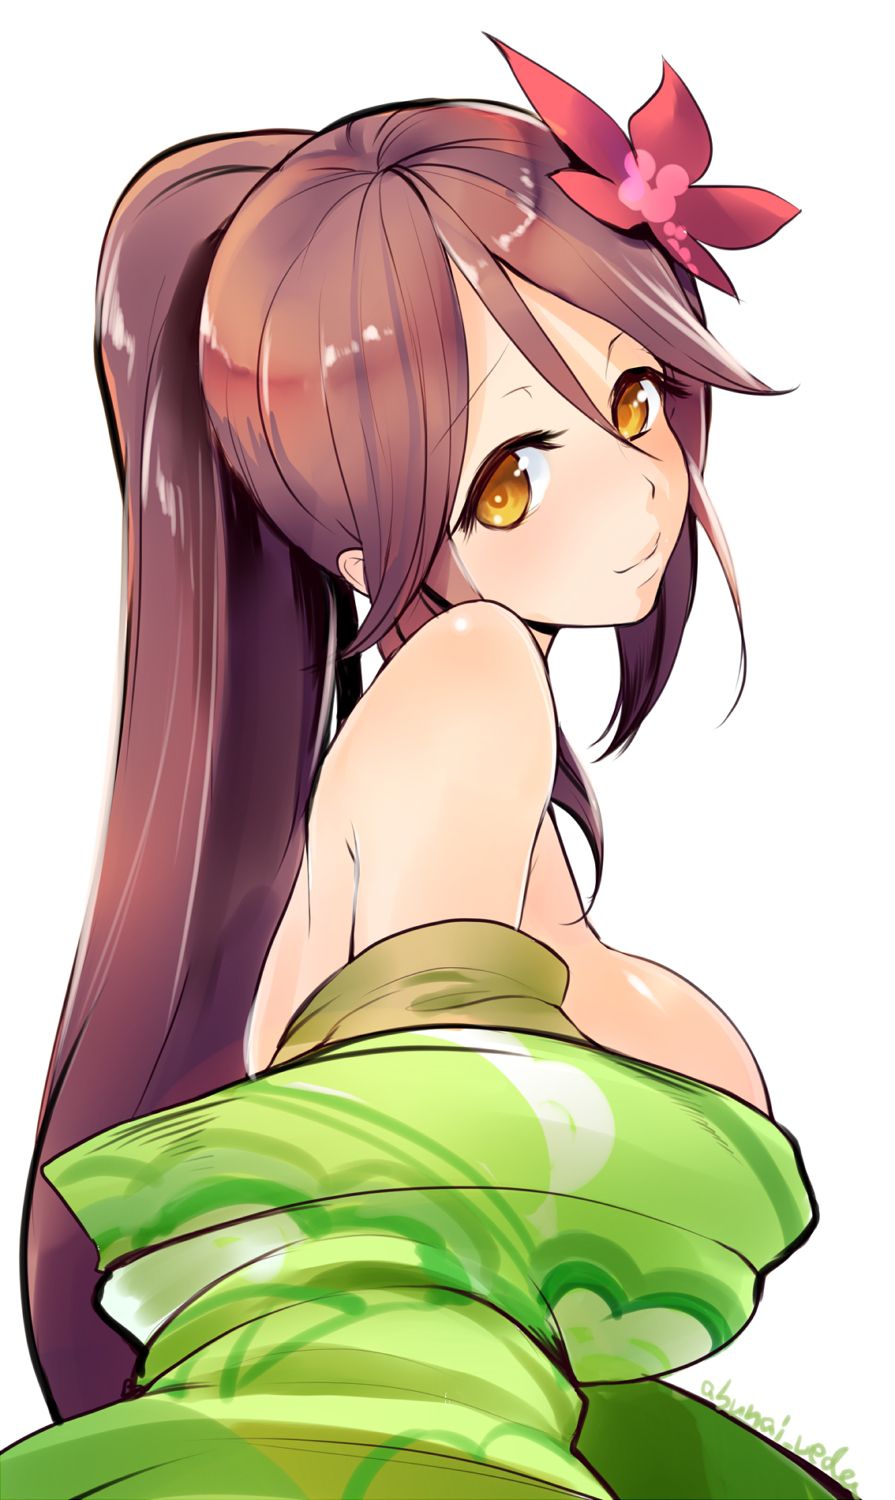 [Secondary, ZIP] ship this cute picture of Amagi-San, please! 8